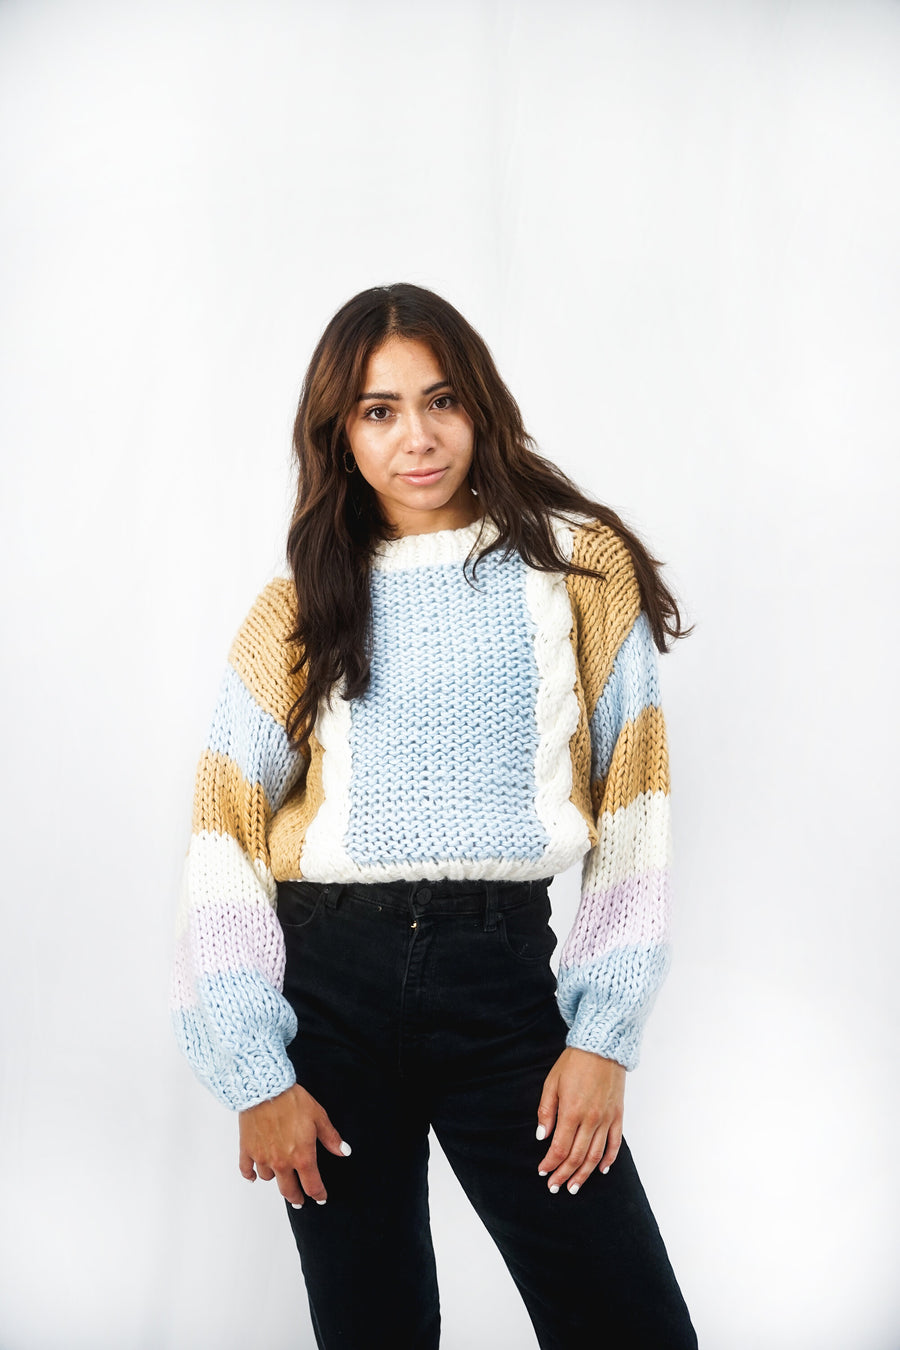 Cable Fronted Handmade Jumper | Blue-Mist CARDIGAN autumn-winter BLUE KNIT M - L S - M SALE stellino